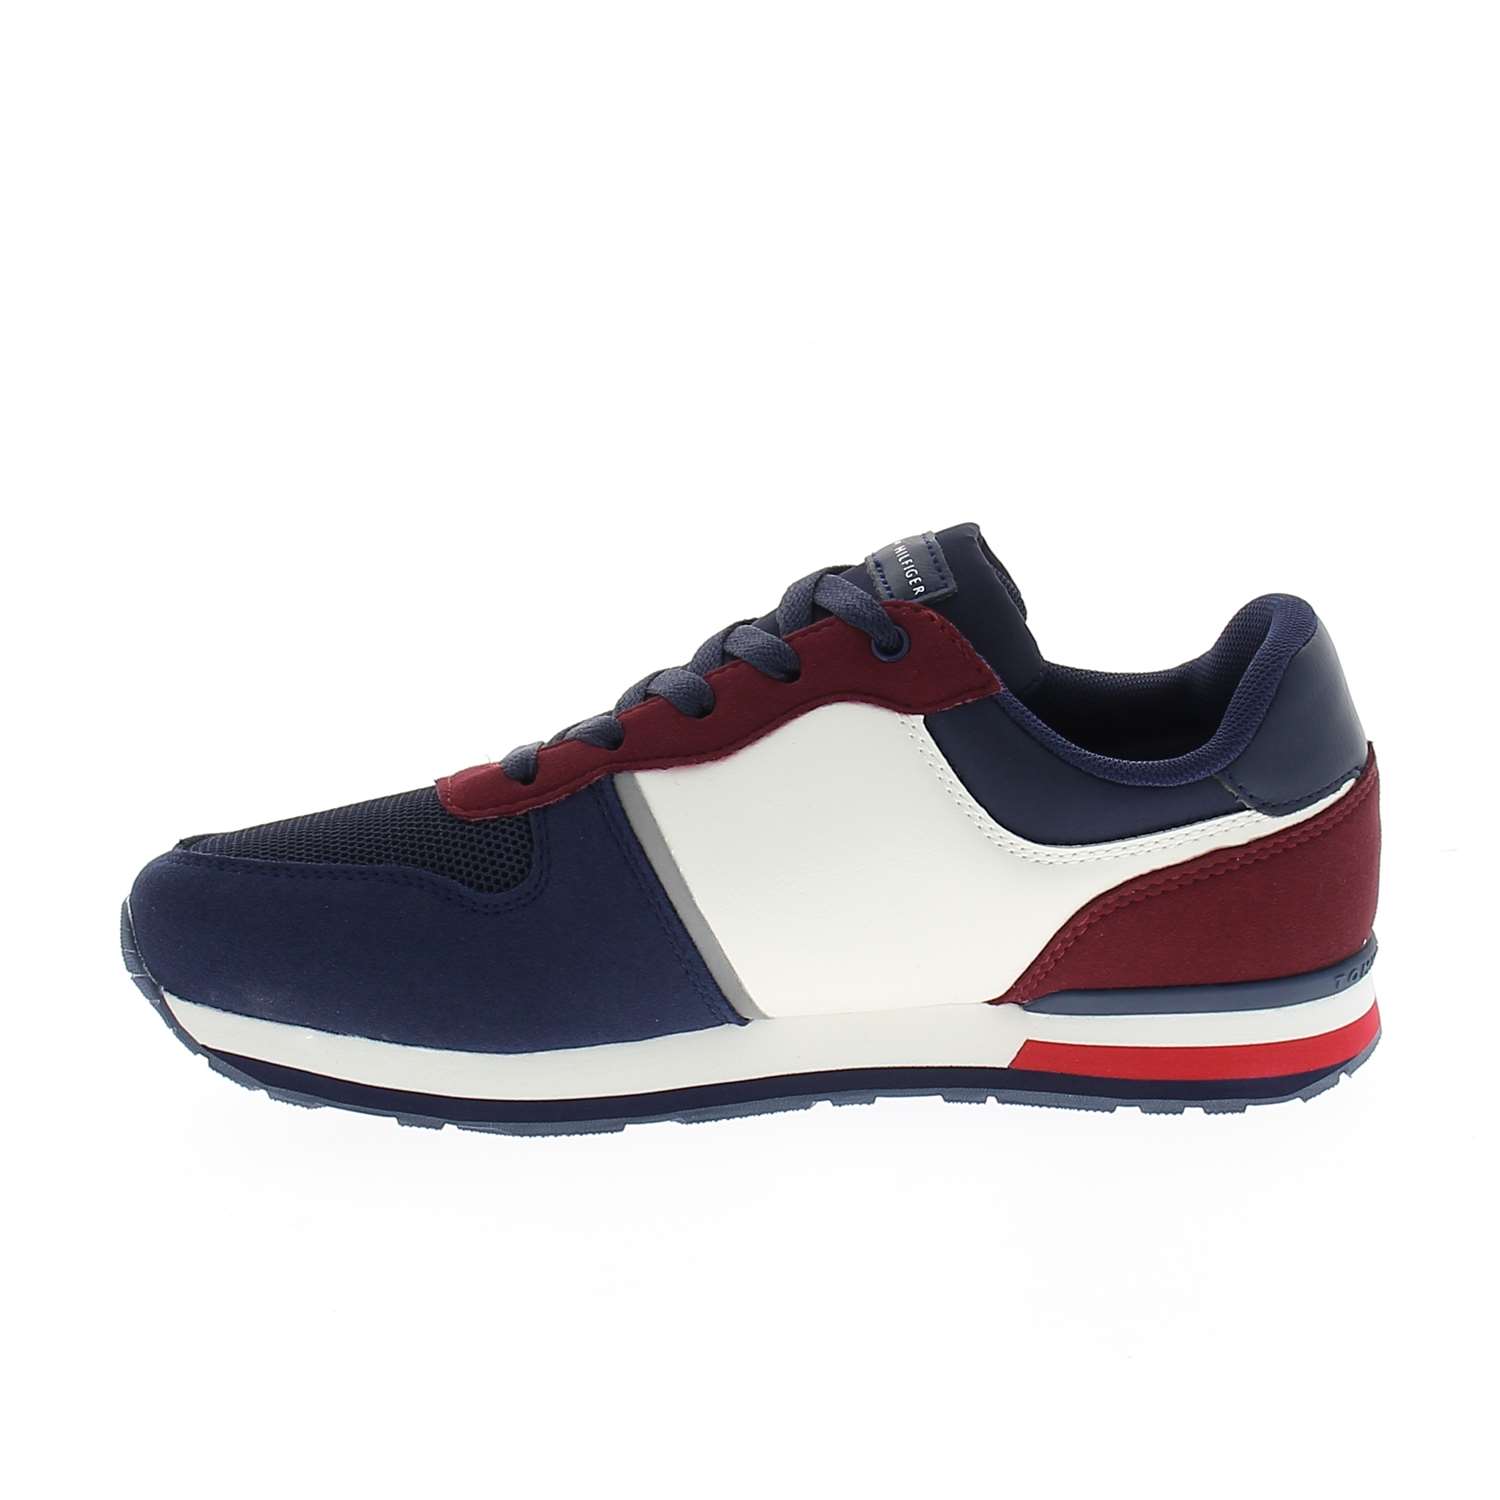 05 - NEWTON - TOMMY HILFIGER - Chaussures basses - Synthétique